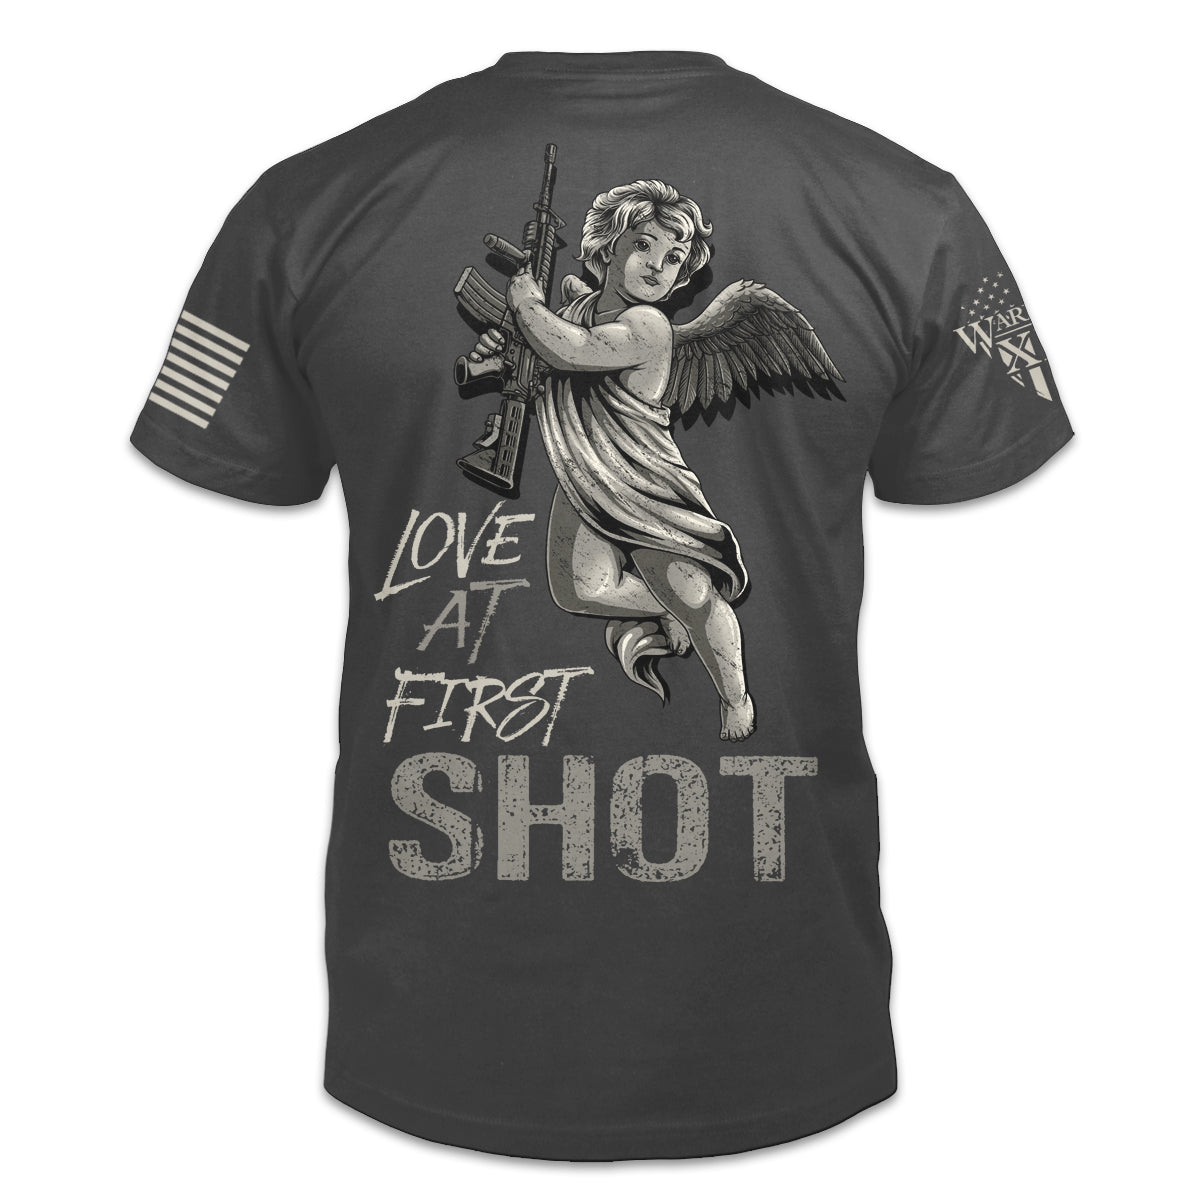 The back of a dark grey t-shirt with the words "Love at first shot" printed on the back with an image of cupid holding a rifle.